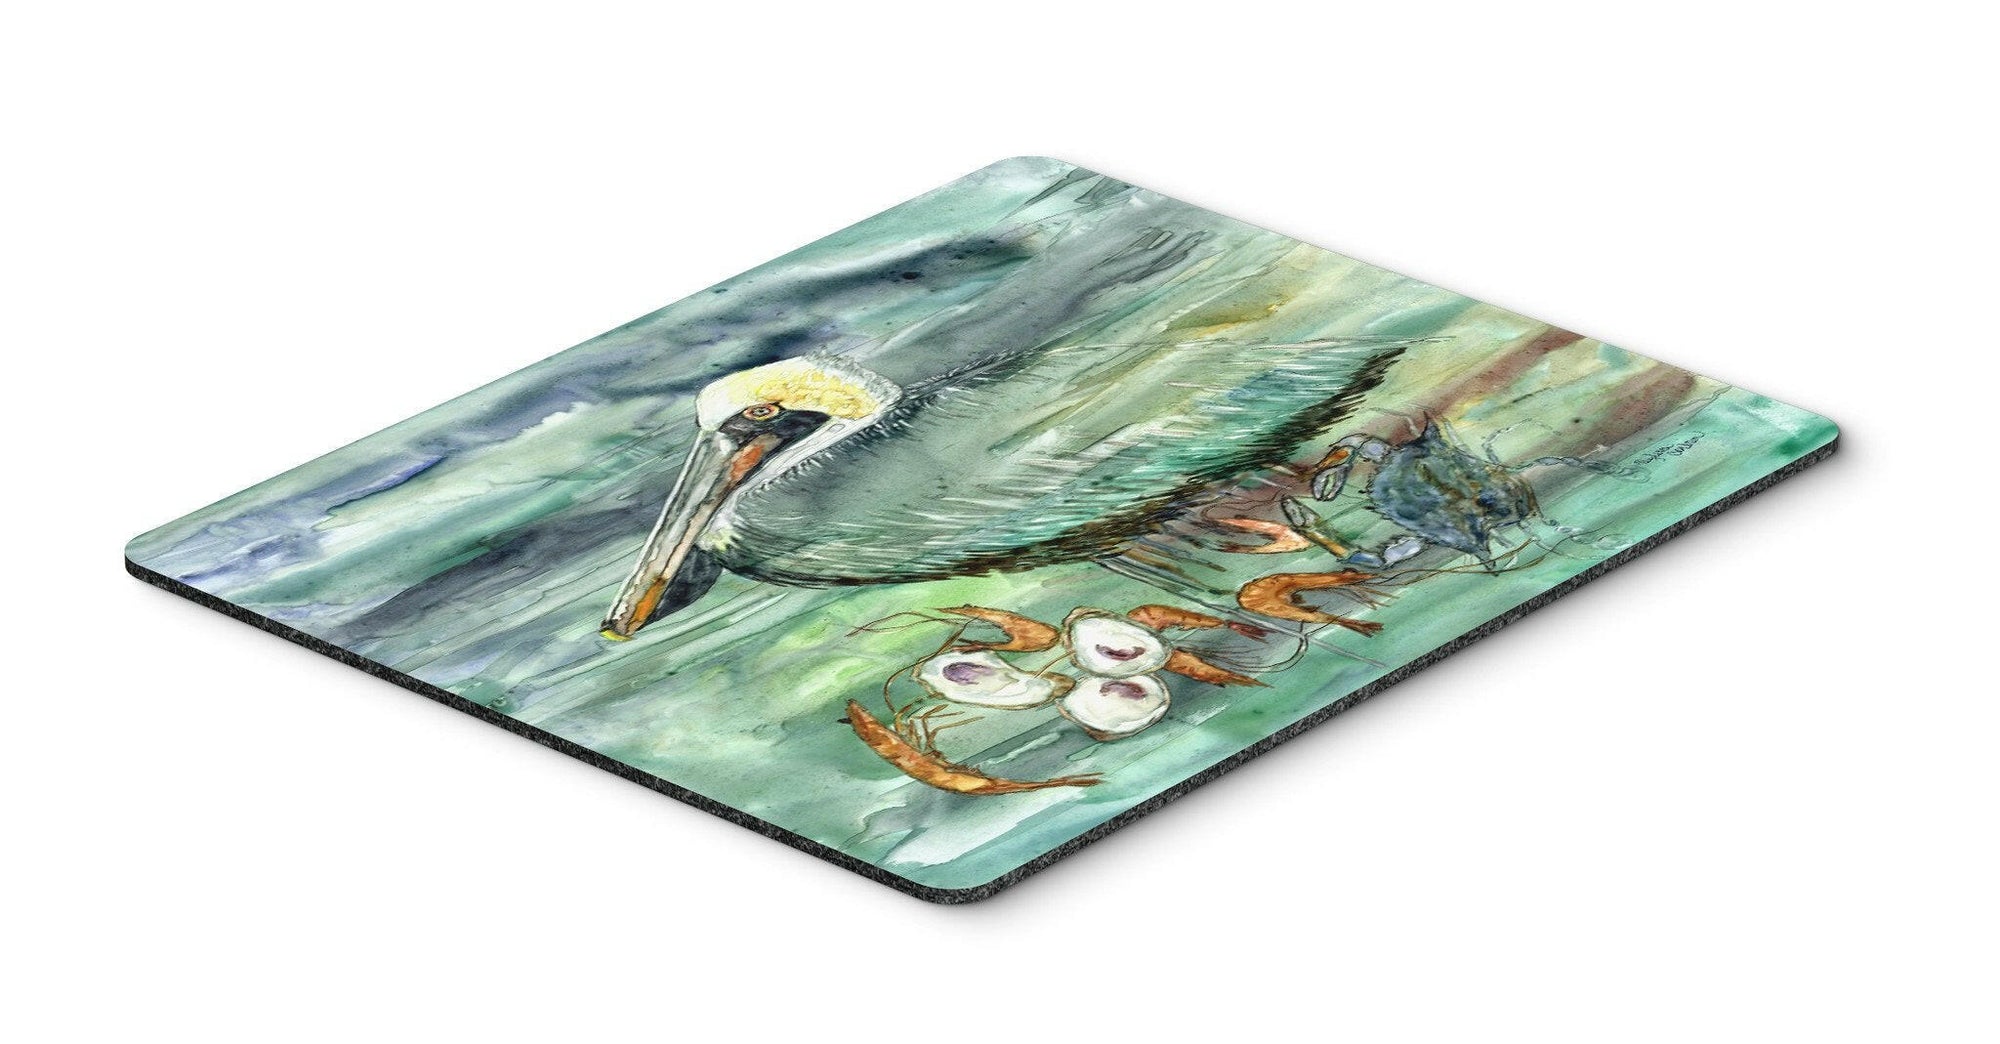 Watery Pelican, Shrimp, Crab and Oysters Mouse Pad, Hot Pad or Trivet 8978MP by Caroline's Treasures